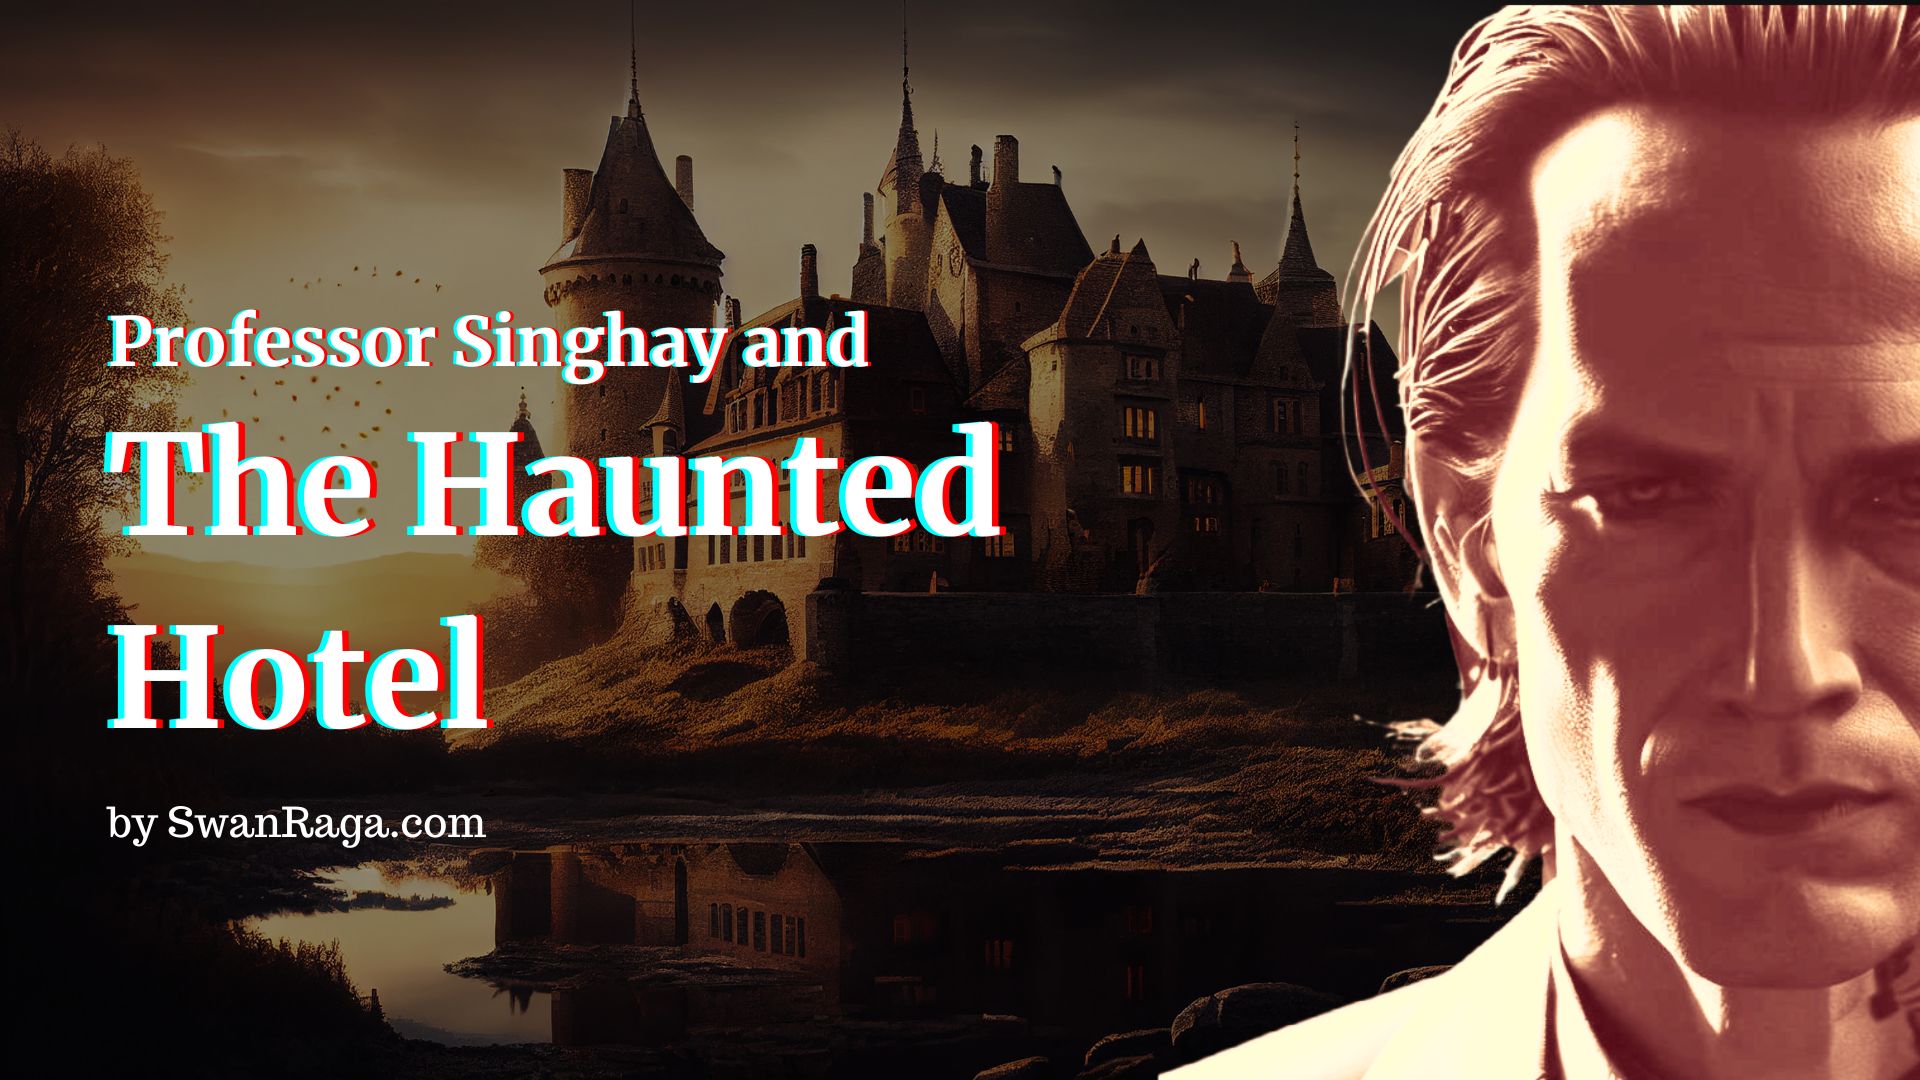 Bedtime Story: Professor Singhay and The Haunted Hotel